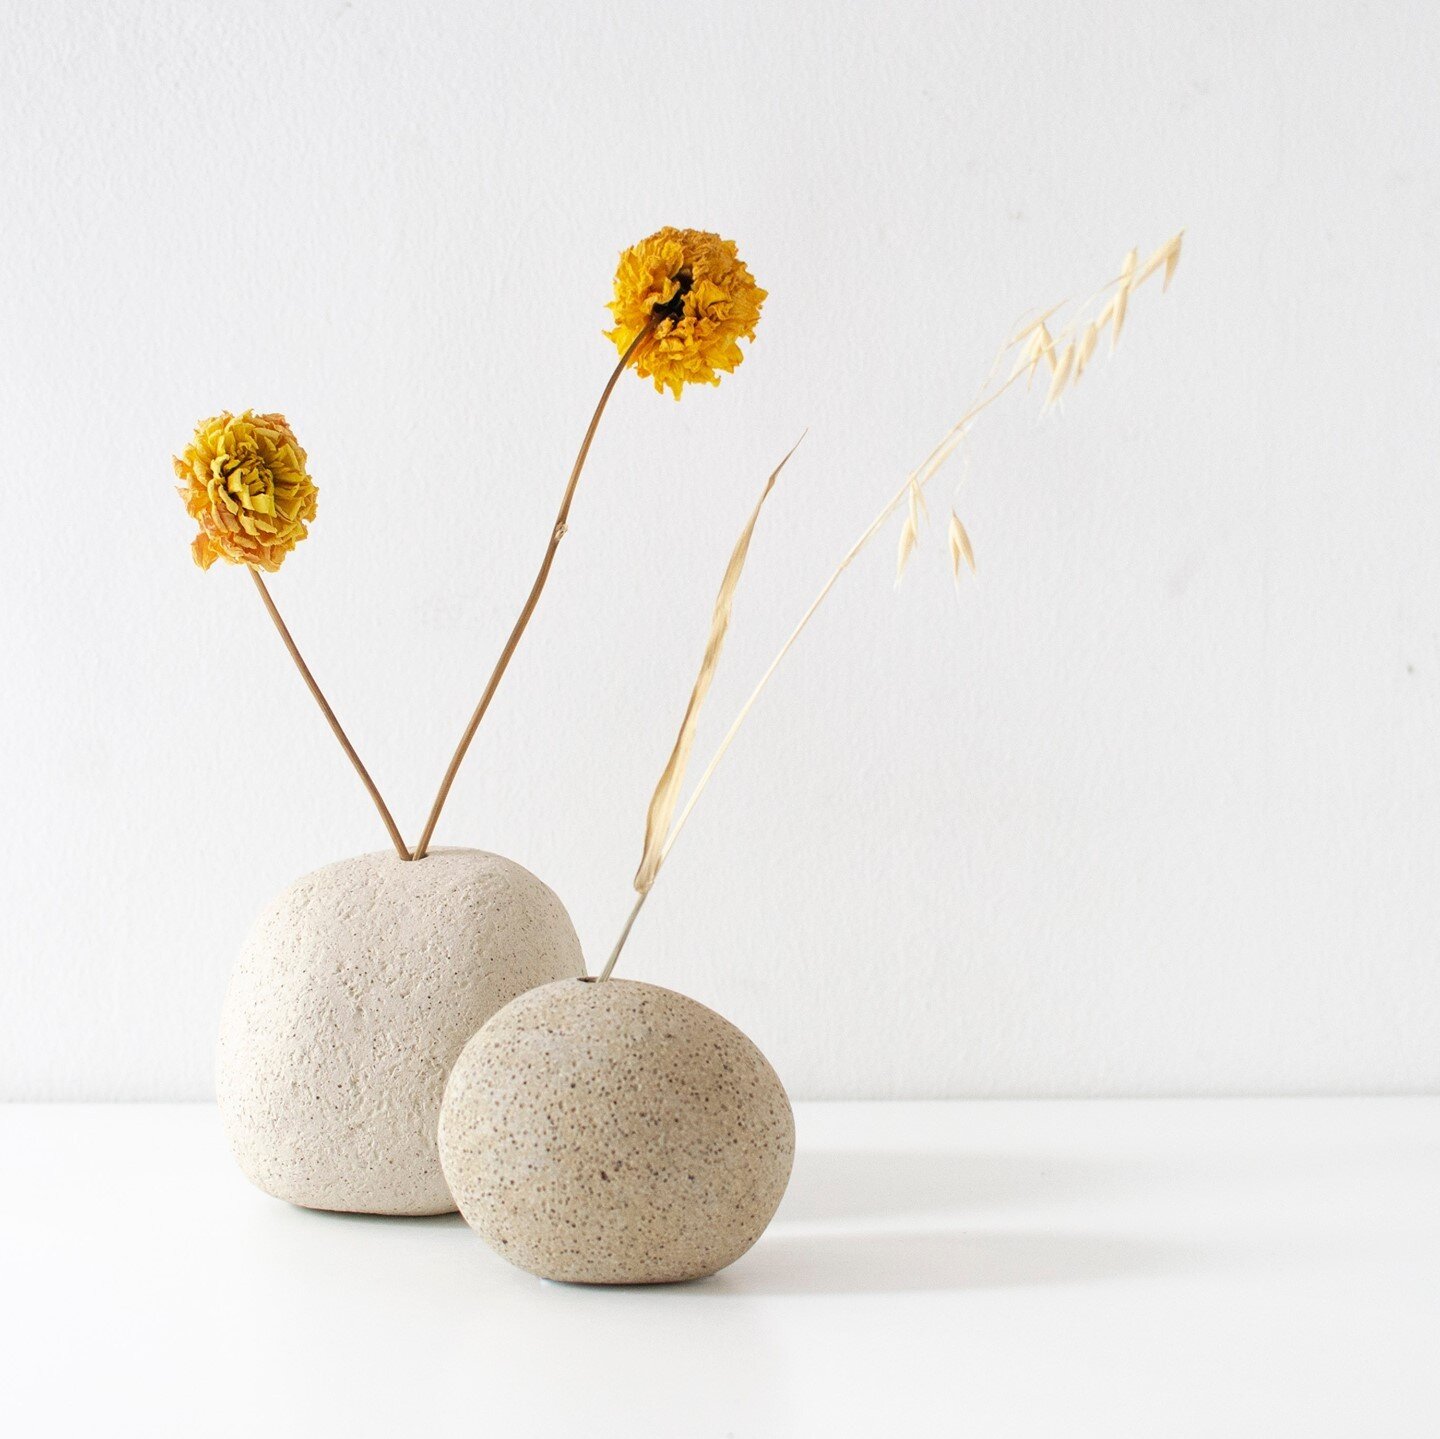 New work by @katie_timson has arrived at the gallery! How beautiful are these pebble vases 💛 They are made from a variety of different clay body mixtures and look fab with a dried stem or two!⁠
⁠
Now available online and in the gallery:⁠
www.cambrid